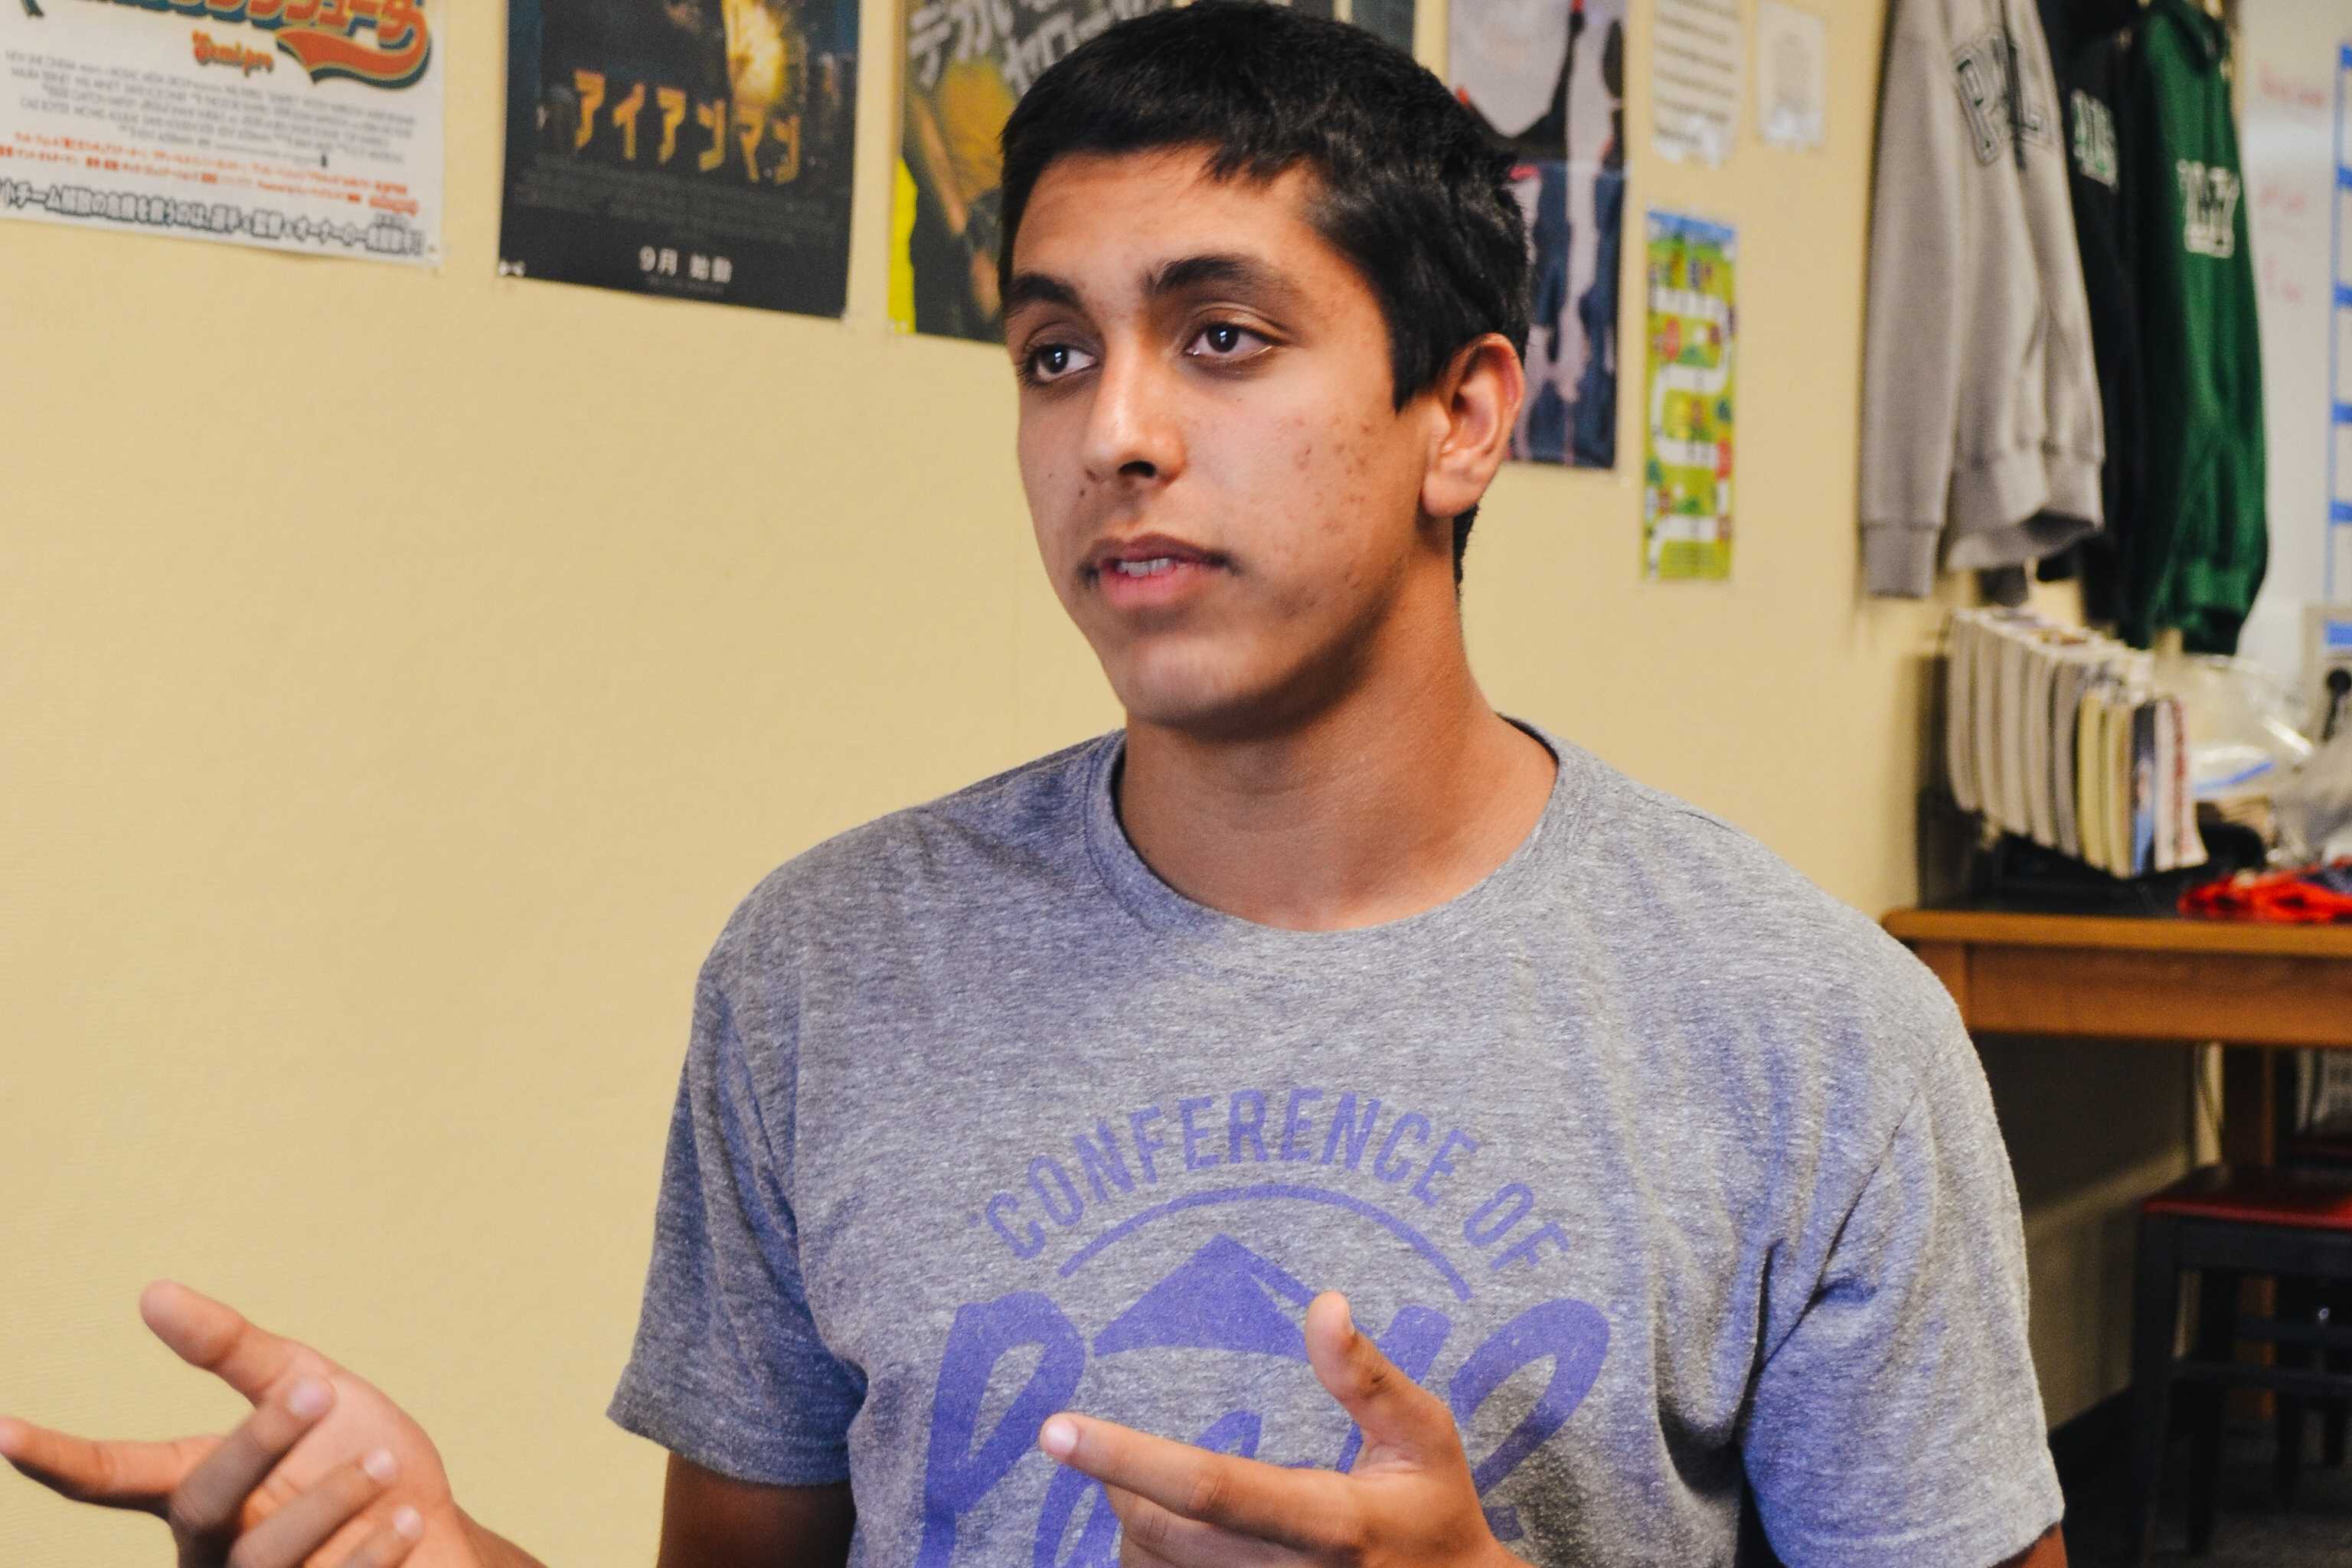 Associated Student Body president Jaiveer Sandhu discusses his plans for Quadchella. "We expect Quadchella to be popular among the students and look forward to the event," Sandhu said. Photo: Angelina Wang.